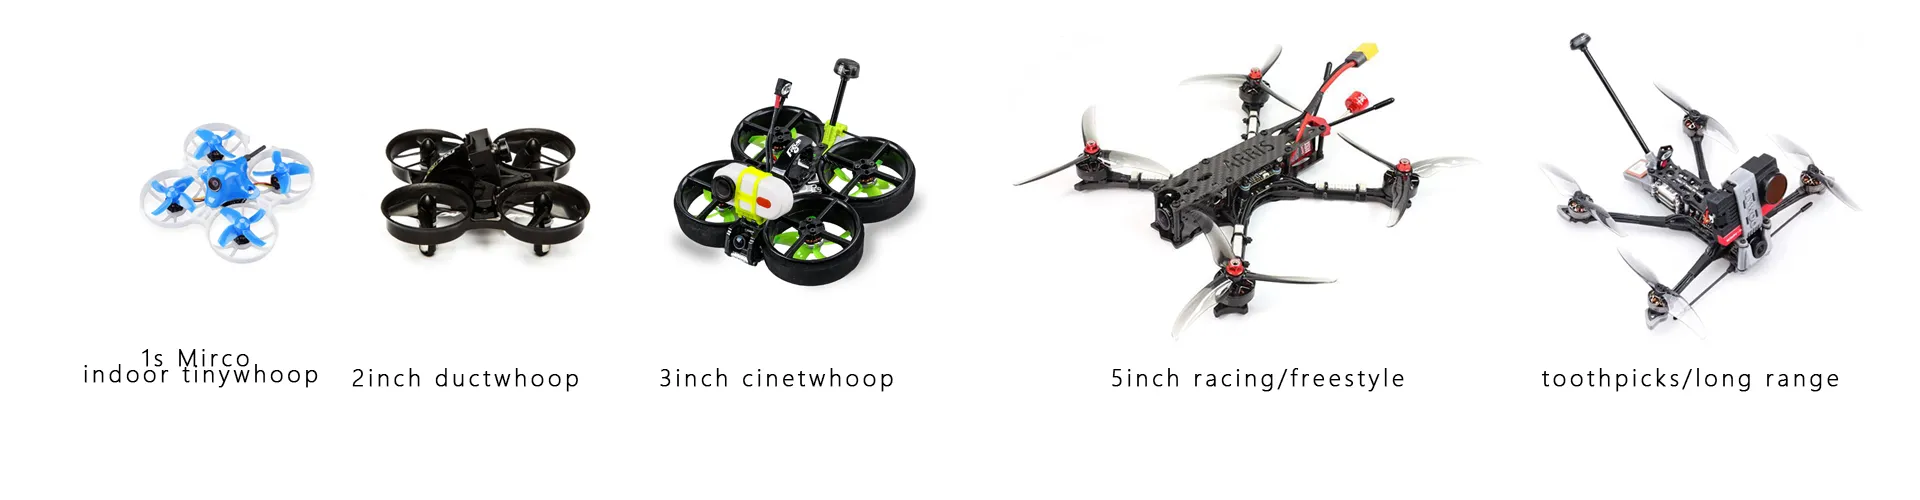 fpv-drone-categories